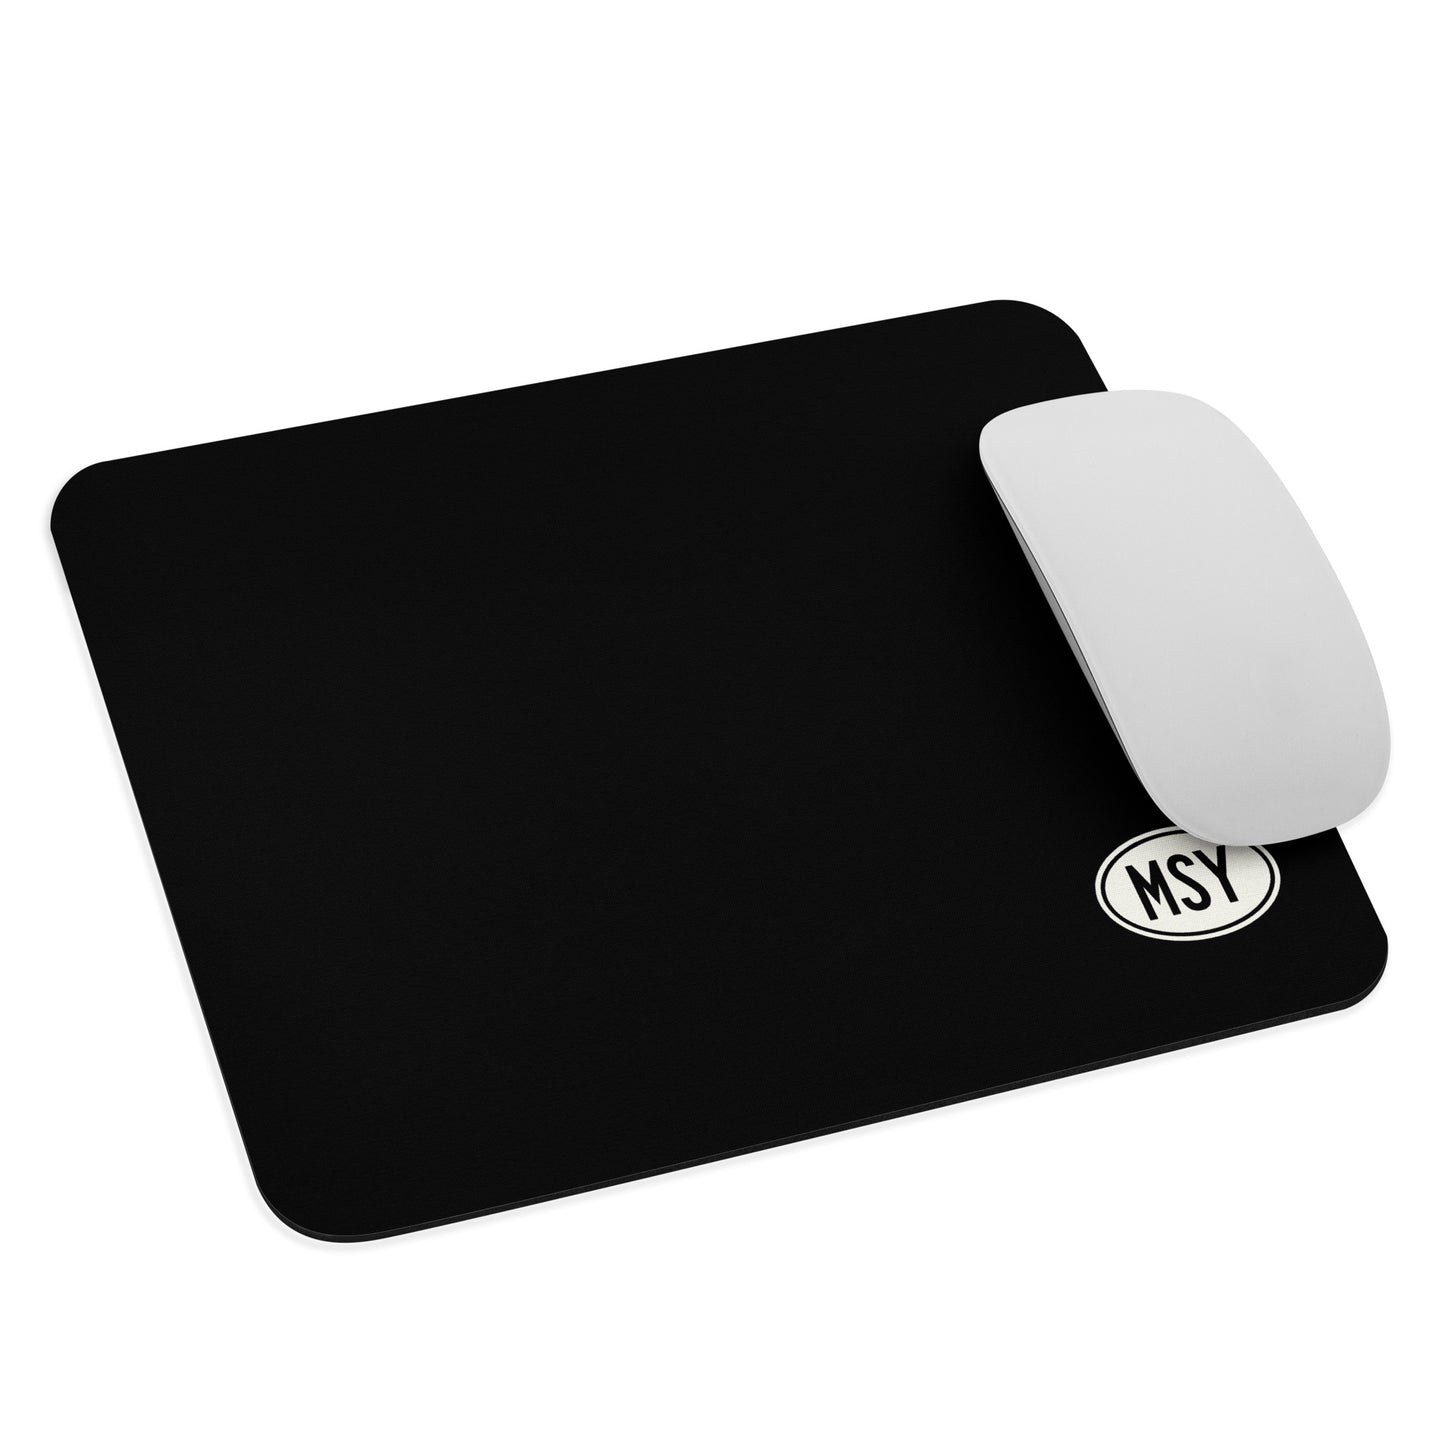 Unique Travel Gift Mouse Pad - White Oval • MSY New Orleans • YHM Designs - Image 03